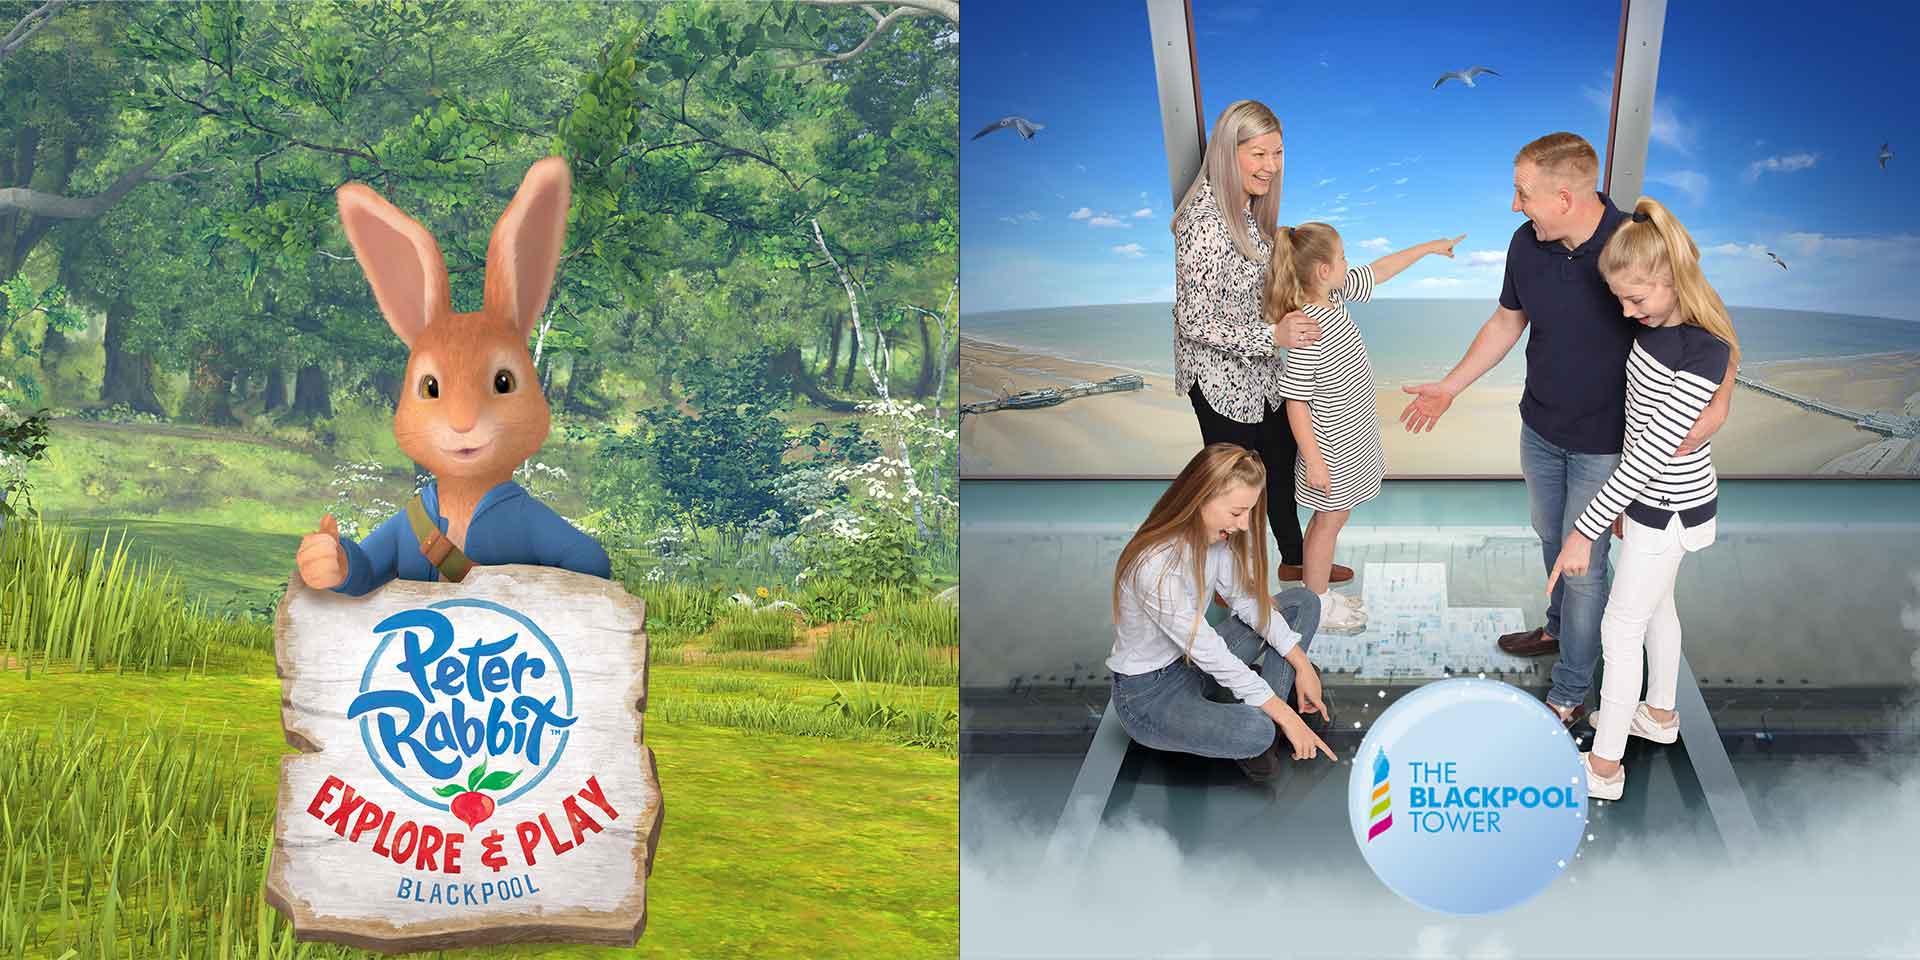 Peter Rabbit Explore and Play plus The Blackpool Tower Eye